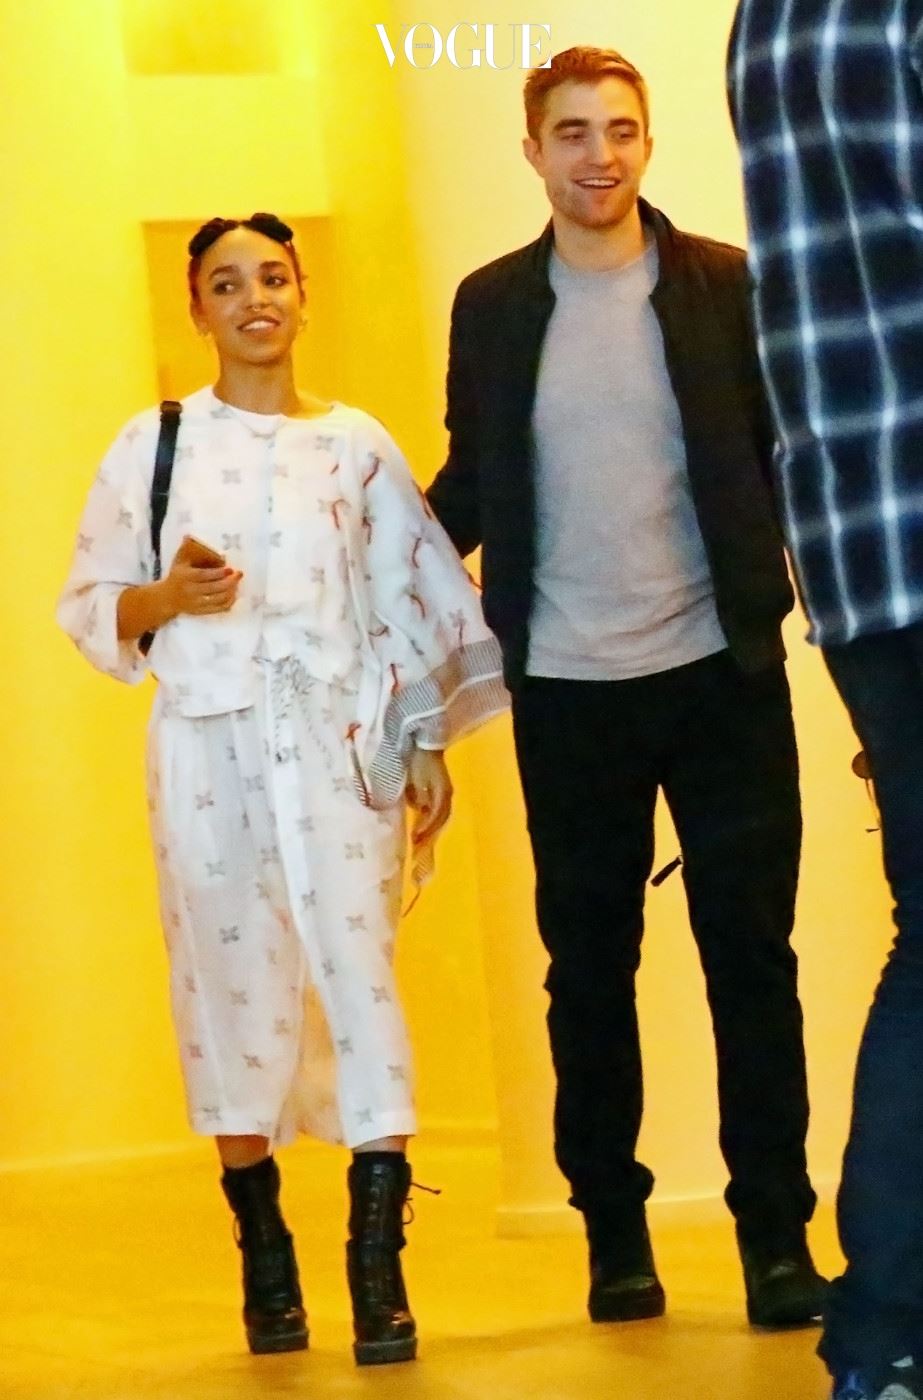 MIAMI, FL - DECEMBER 04:  (L-R) Singer FKA Twigs and Robert Pattinson attend a Surface Magazine Event With Hans Ulrich Obrist And FKA Twigs at Edition Hotel on December 4, 2014 in Miami, Florida.  (Photo by Astrid Stawiarz/Getty Images for Surface)